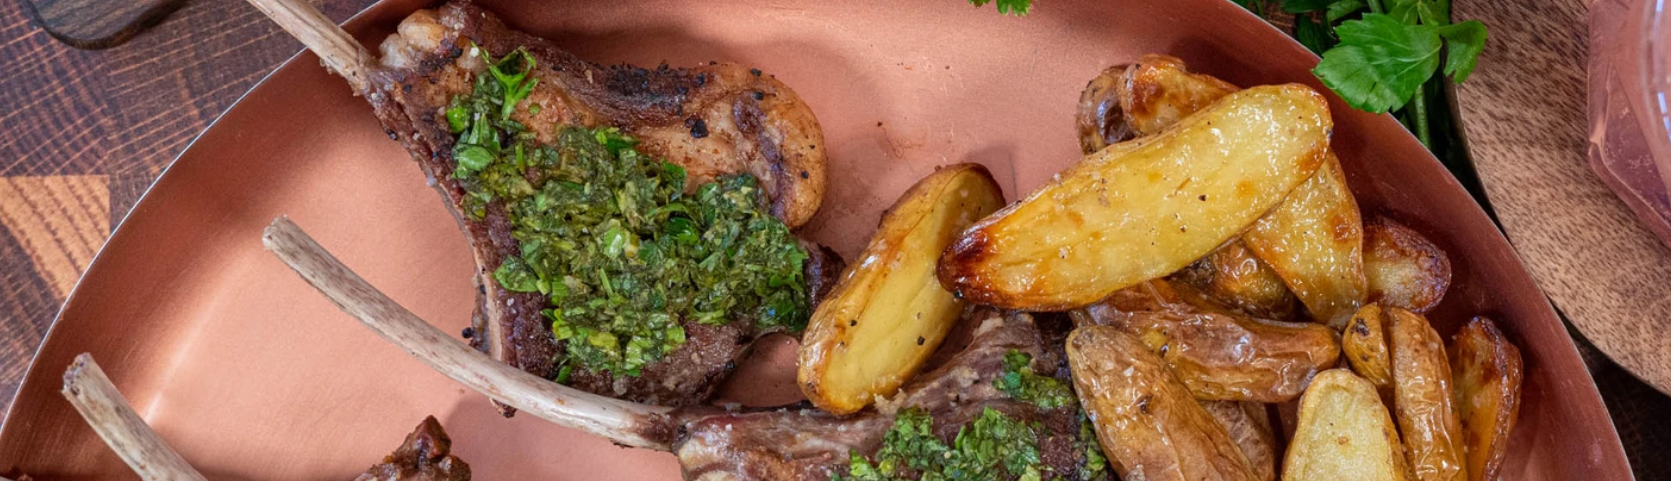 Image of Spring Lamb Chops with Truffle Roasted Fingerling Potatoes